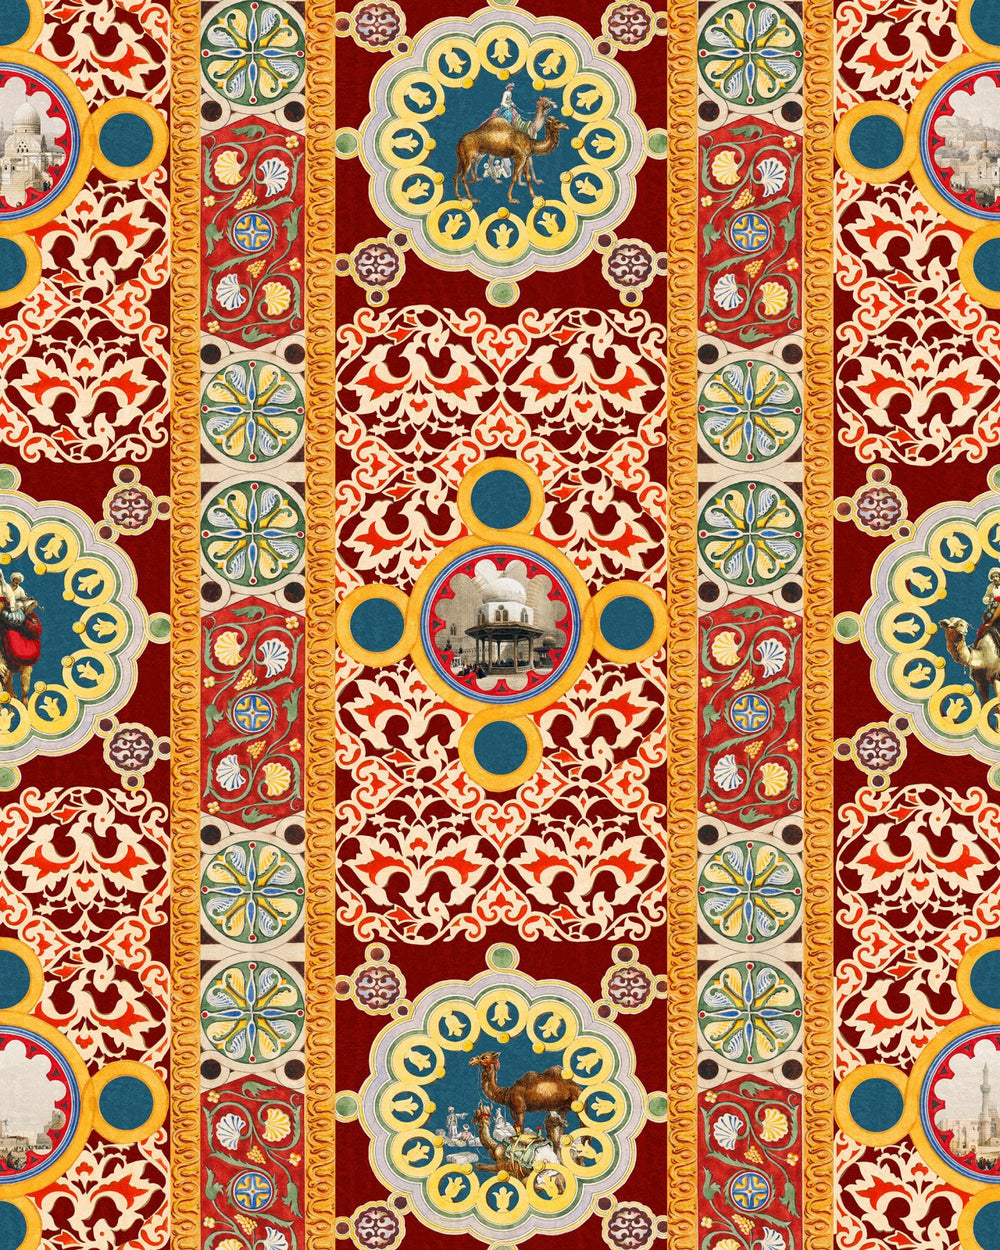 Mind-the-gap-Tales-of-Maghreb-Arab-world-wallpaper-riad-tiles-red-yellow-marble-palce-ornate-repeat-wallpaper-asian-arab-influenced-